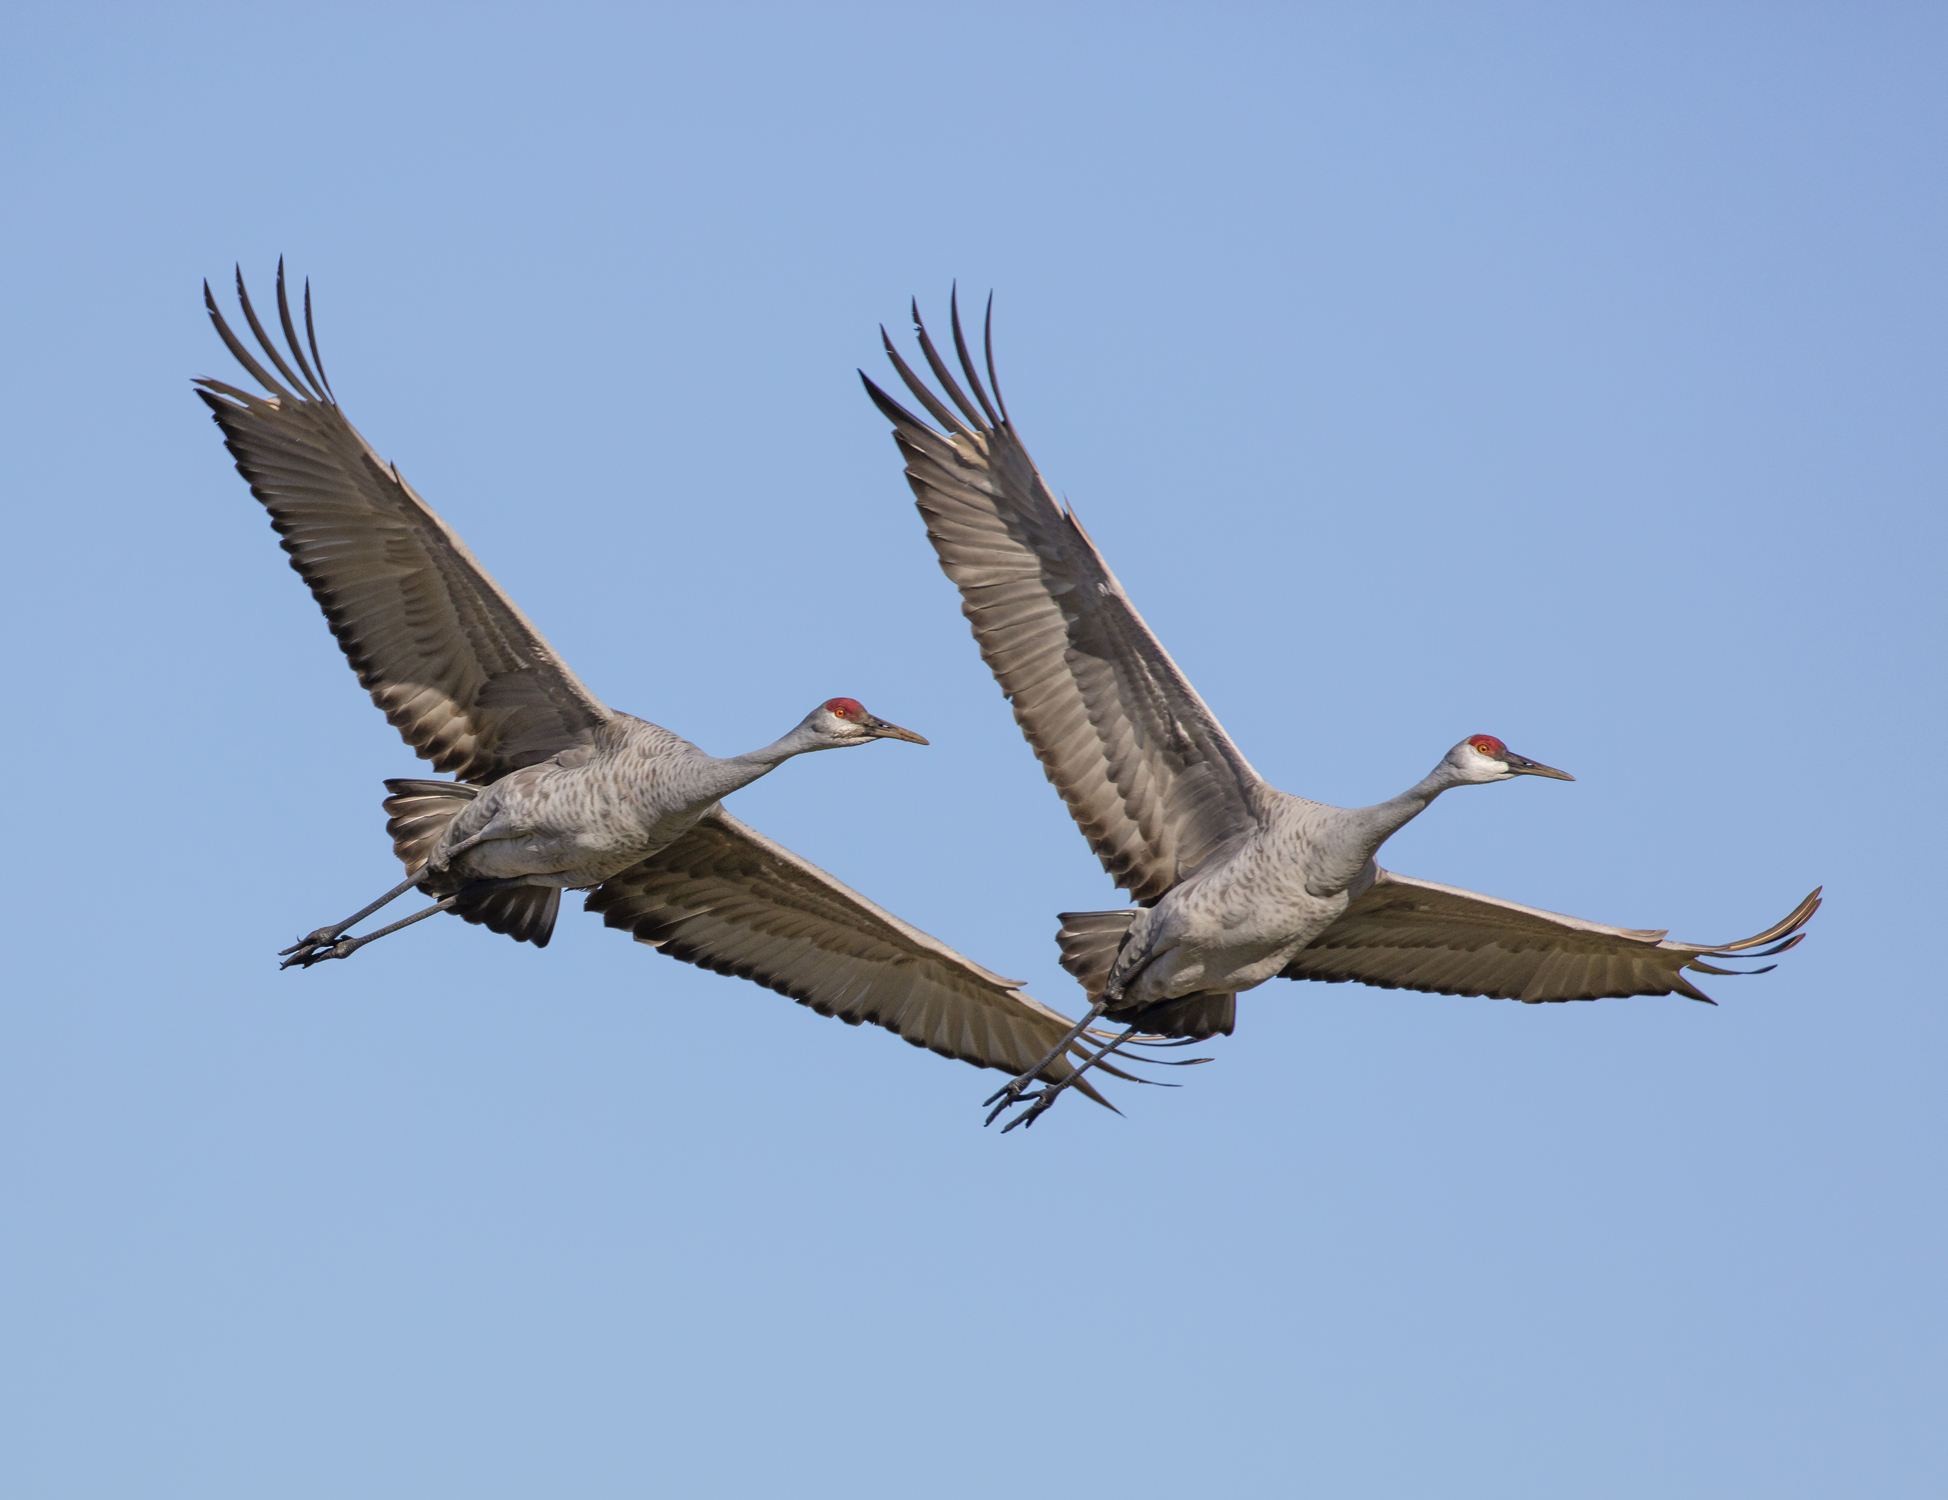 Two sandhill cranes fly across a blue sky